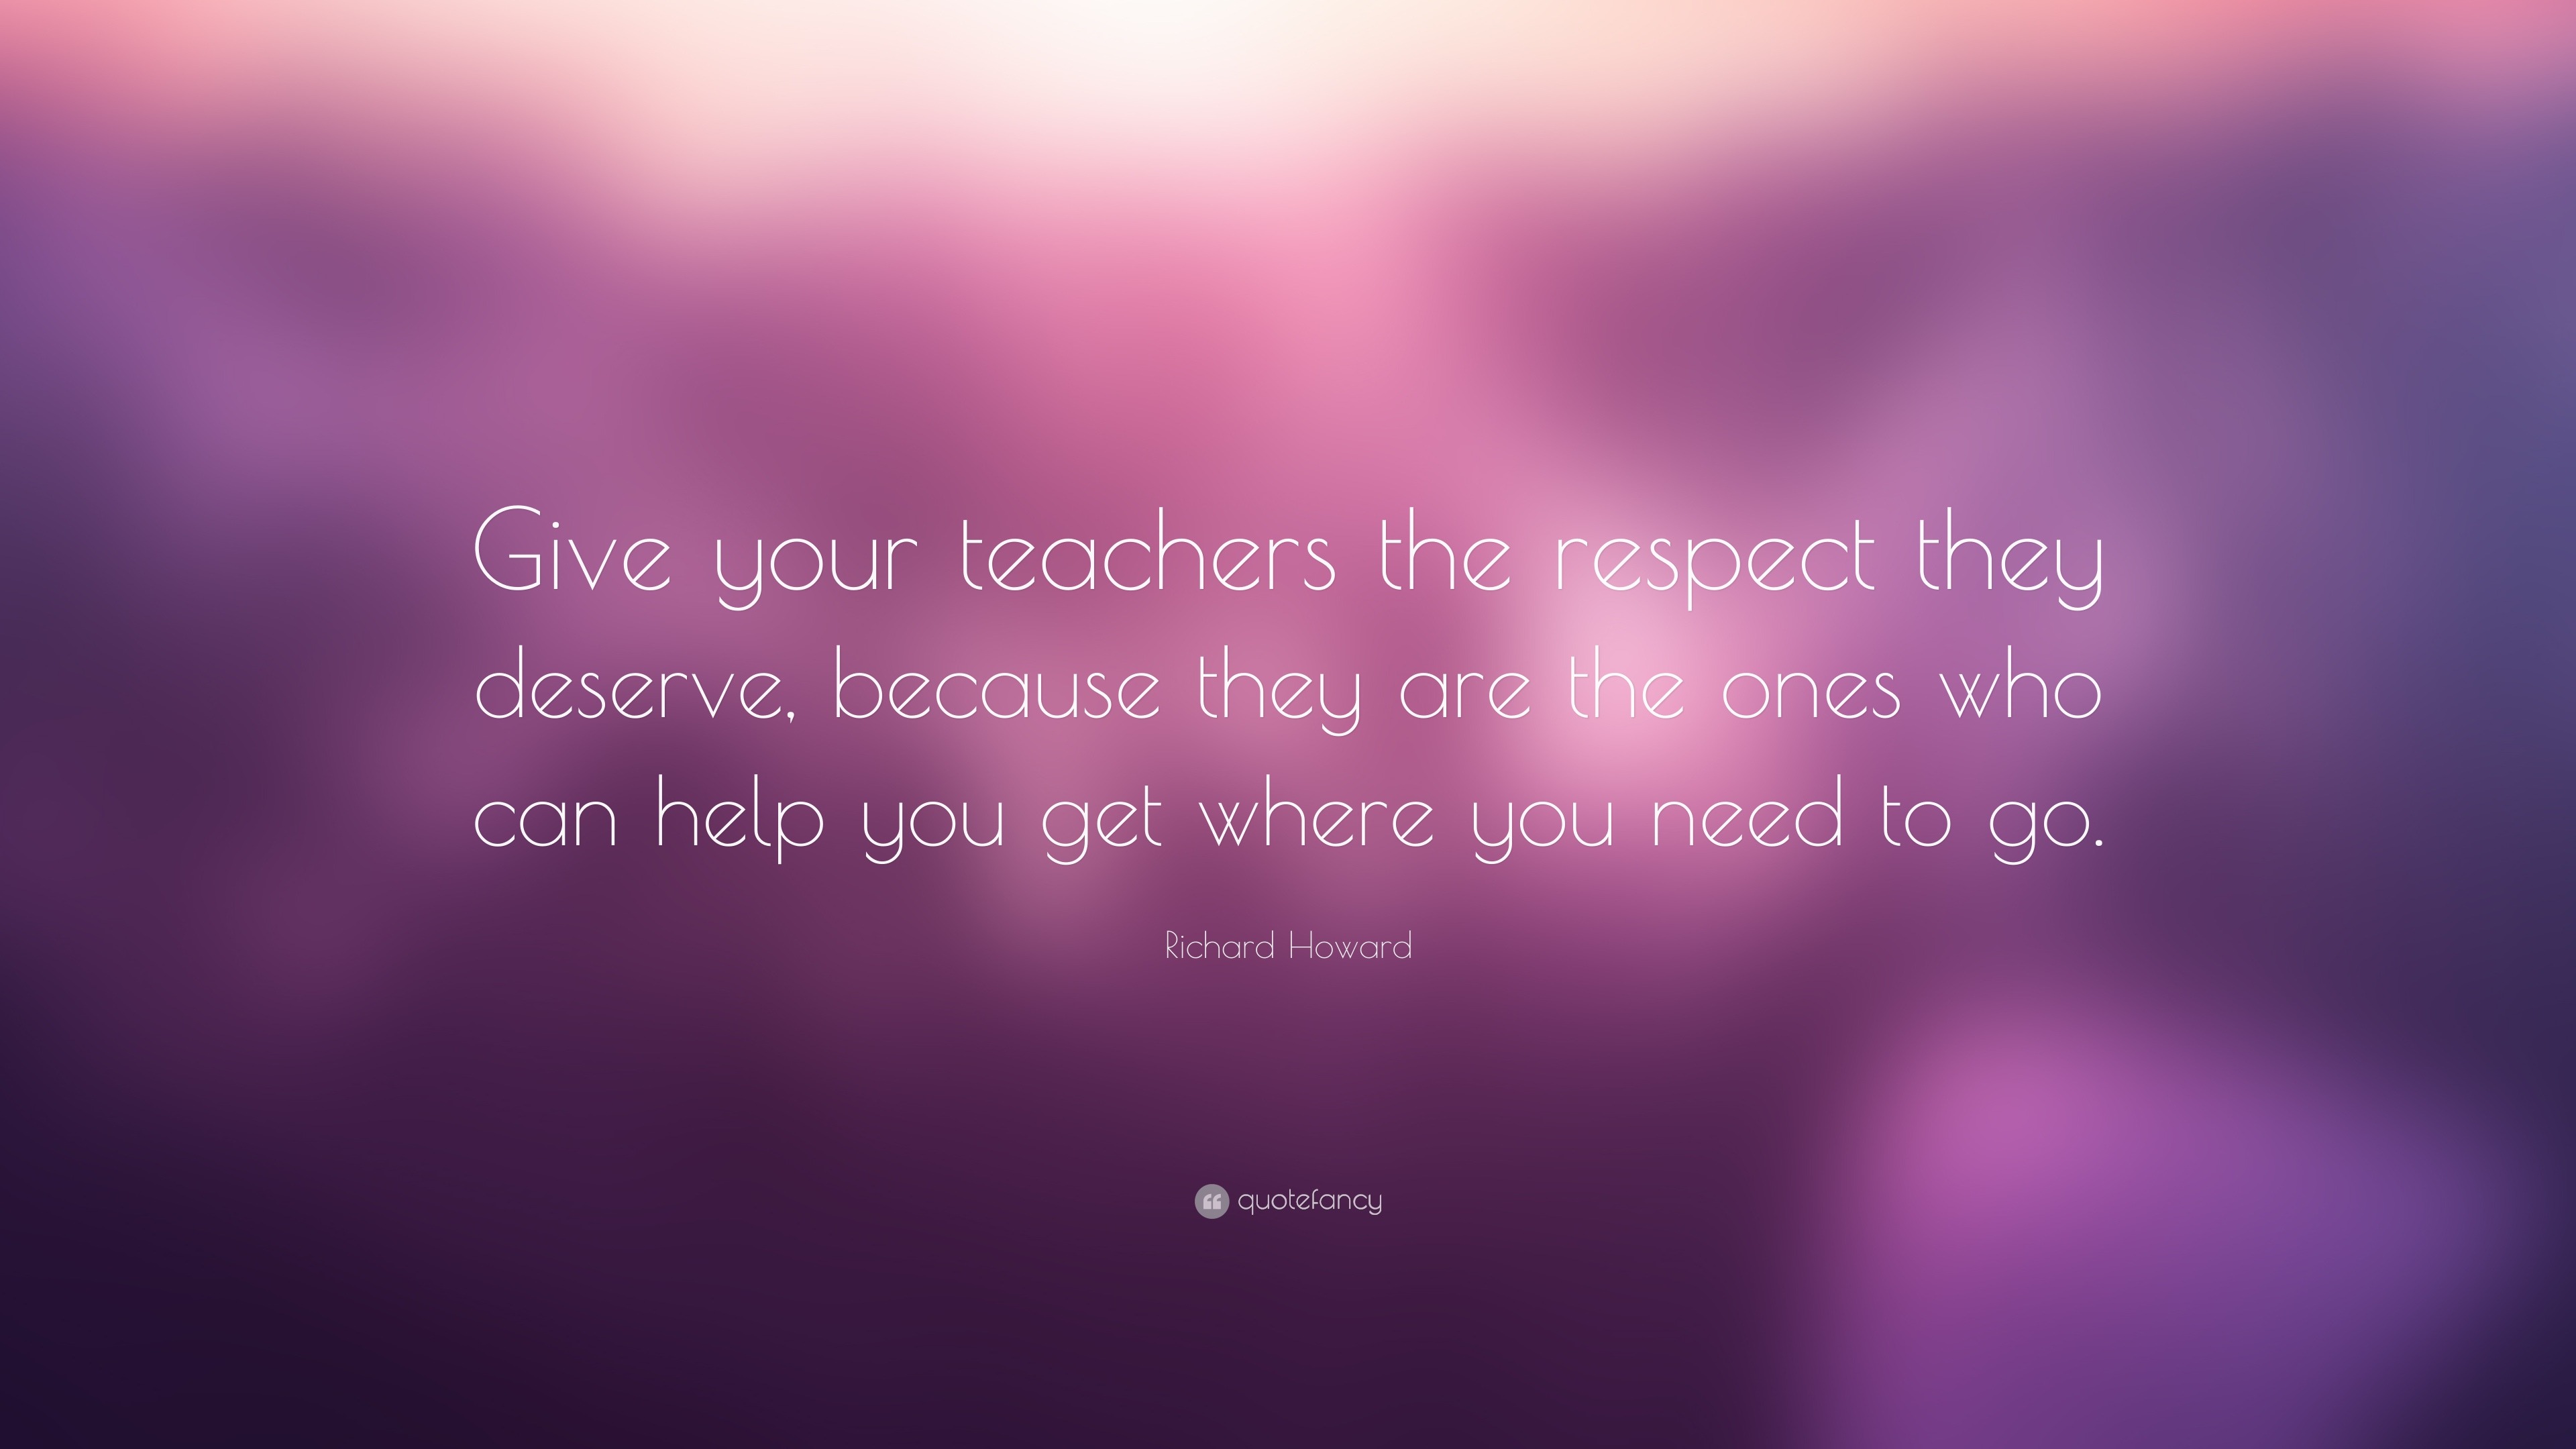 Richard Howard Quote: “Give your teachers the respect they deserve